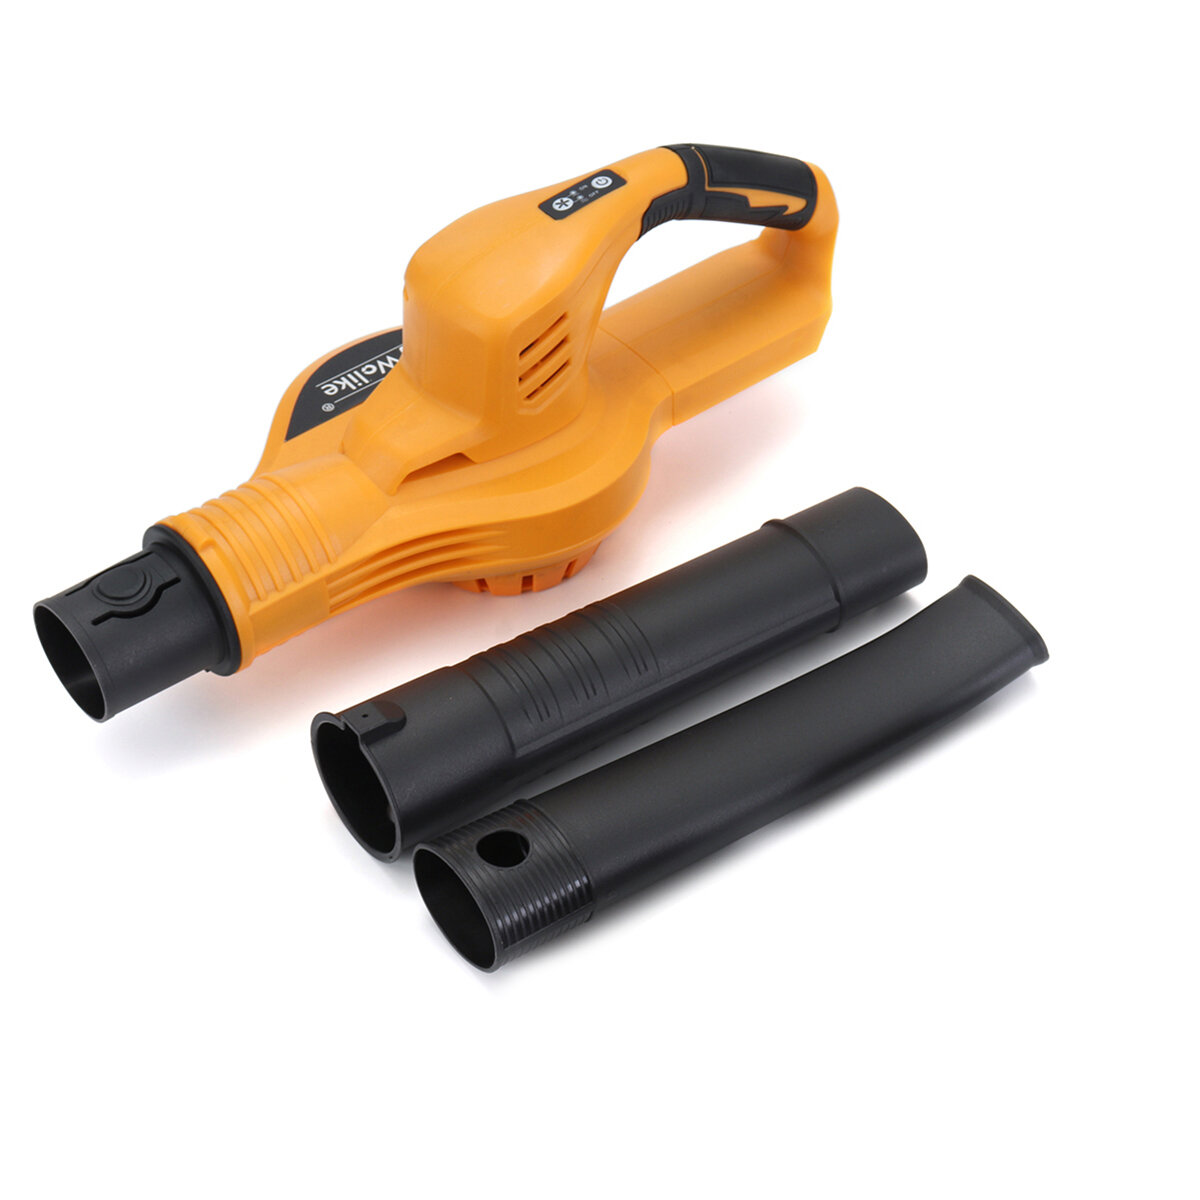 

WOLIKE Cordless Electric Air Blower Handheld Leaf Blower Dust Collector Sweeper Garden Tool with 2 Pipes